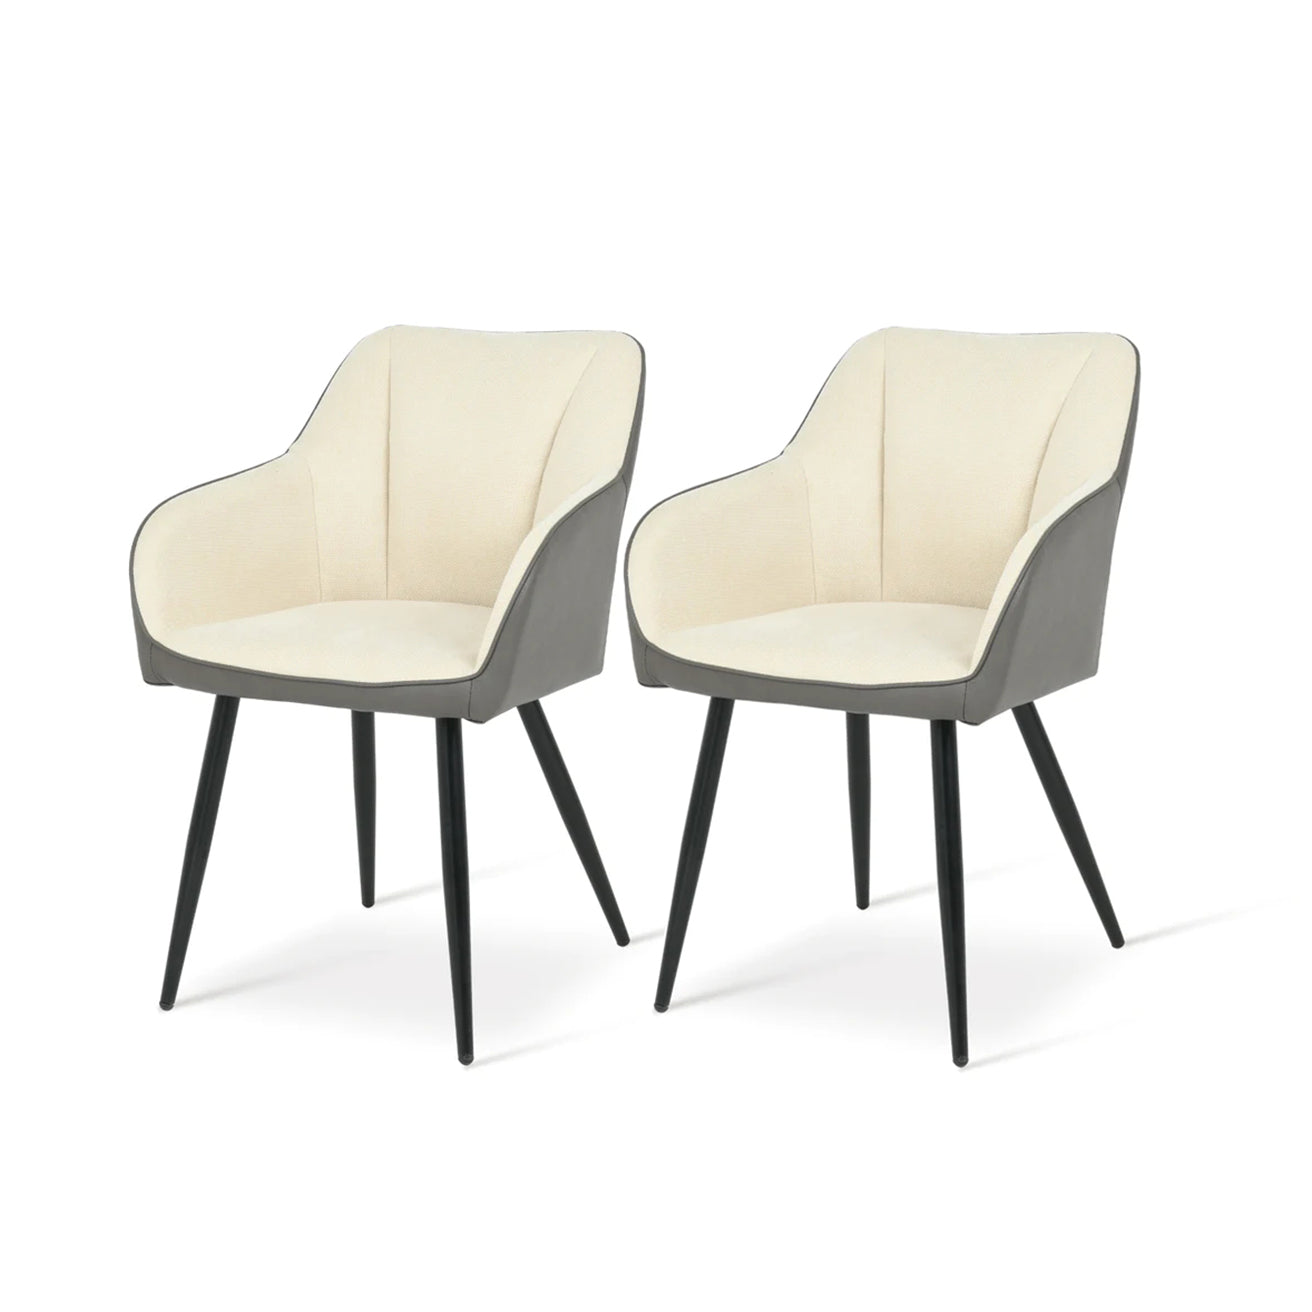 Sienna Bright Dining Chairs [Set of 2] [Pu Leather] [Linen Fabric]